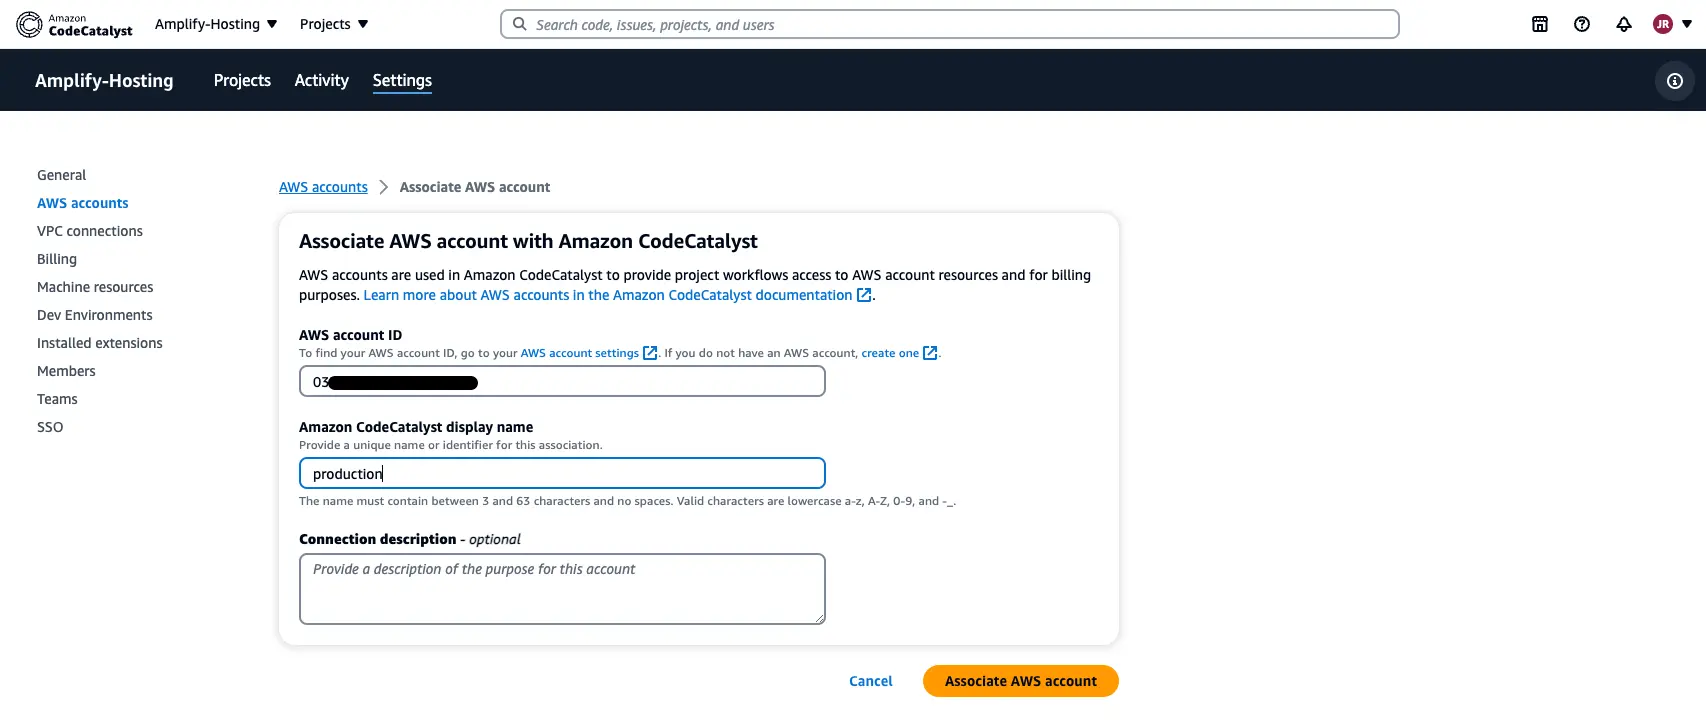 Screenshot of CodeCatalyst console showing details of the Associate AWS account section